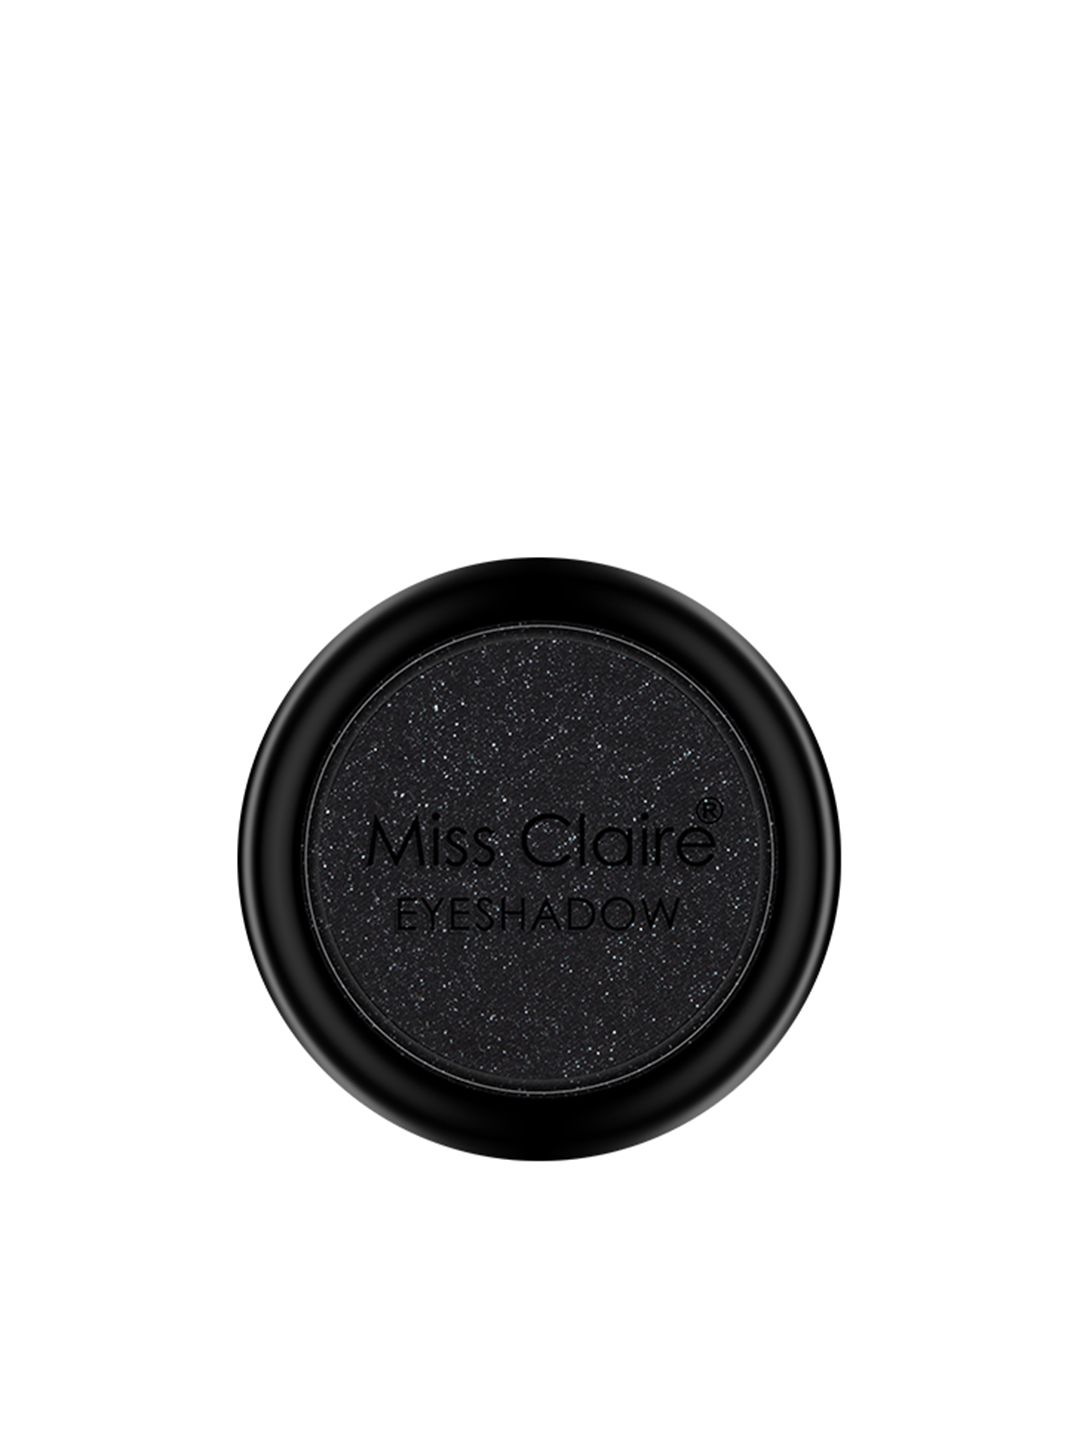 Miss Claire Single Eyeshadow - 0857 Price in India